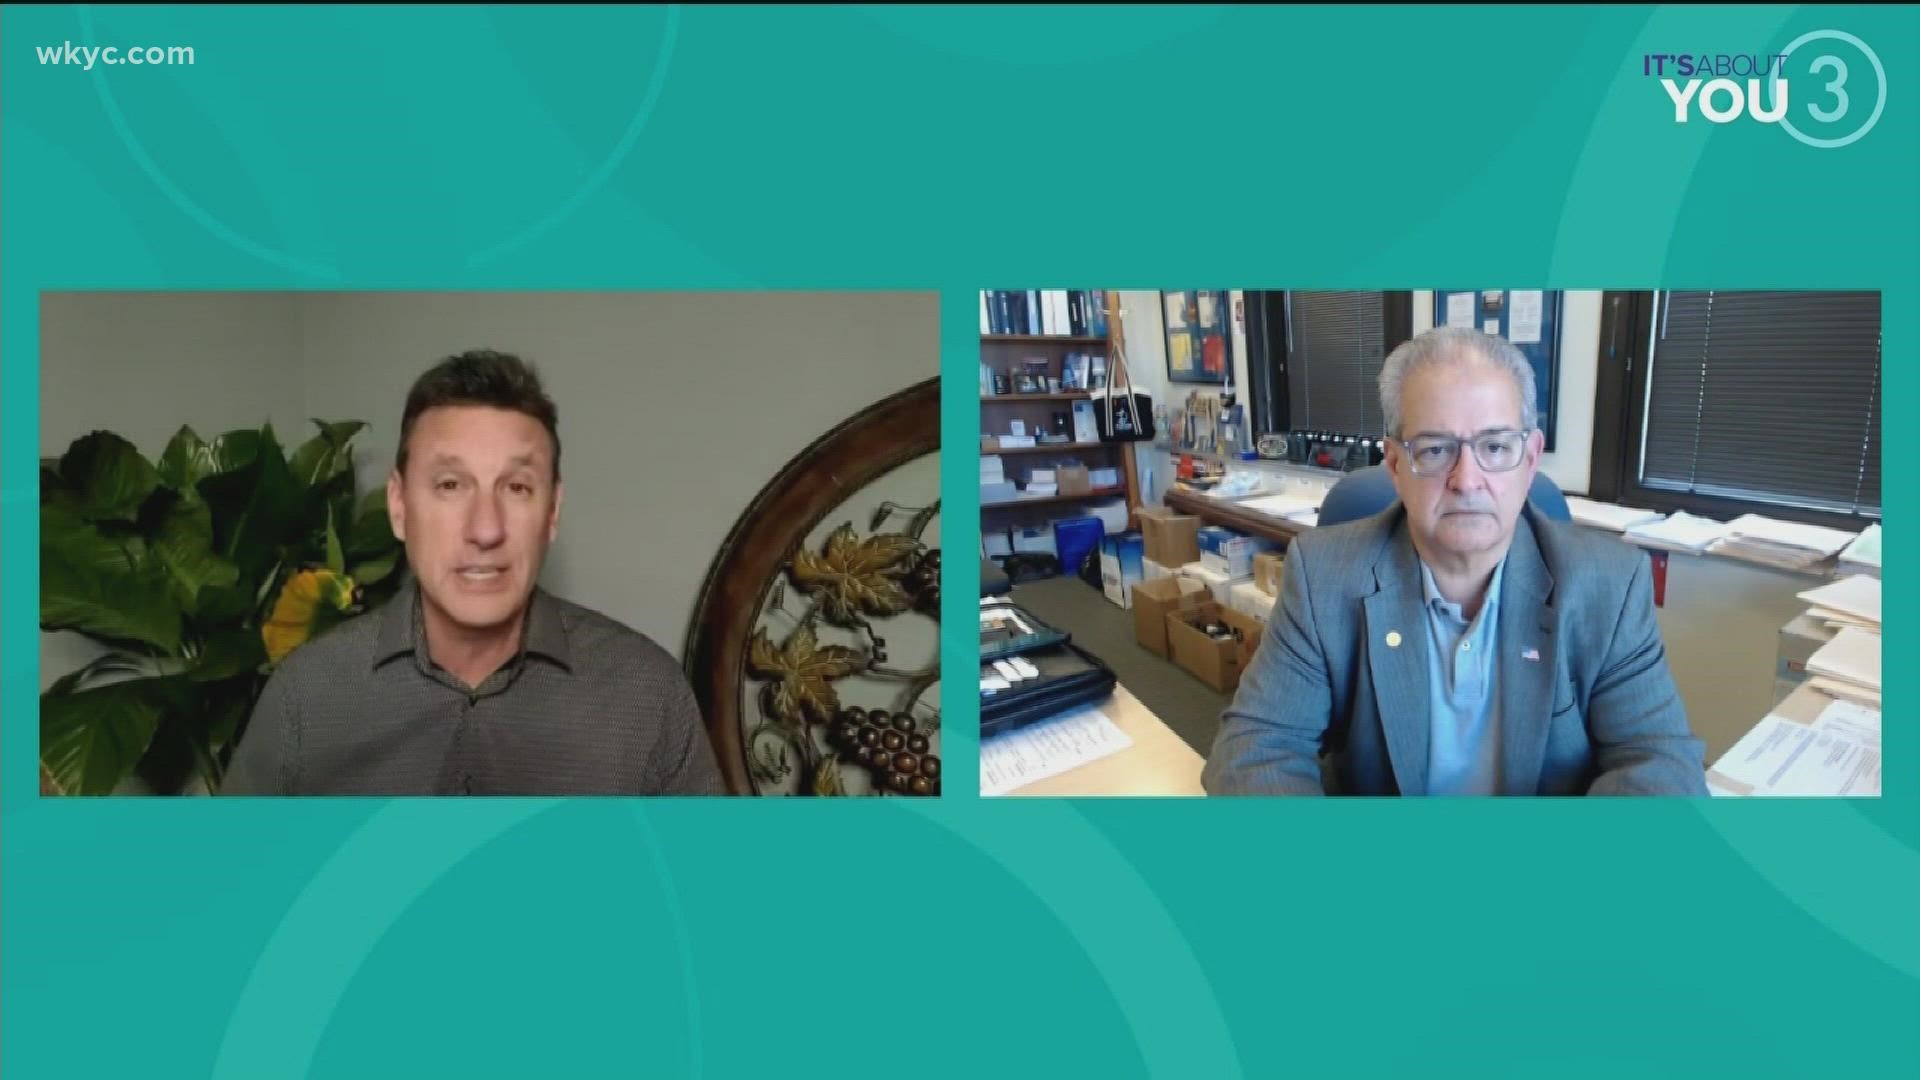 Joe is talking with Tim Dimoff, President & CEO of SACS Consulting, about important tips to keep your personal information and data safe online.